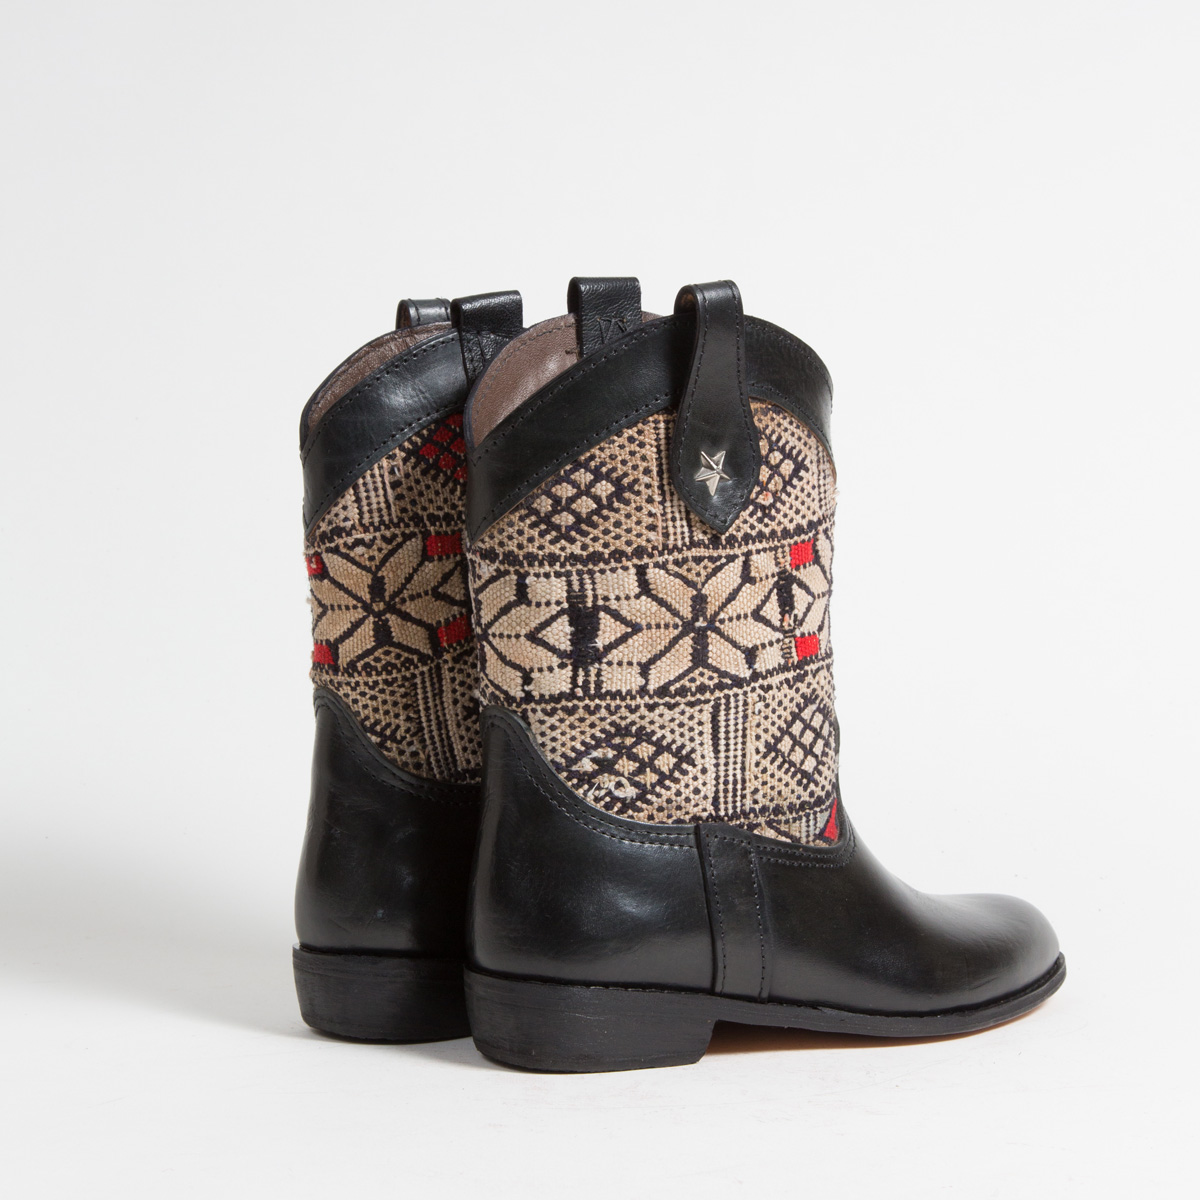 Bottines Kilim cuir mababouche artisanales (Réf. MN4-38)